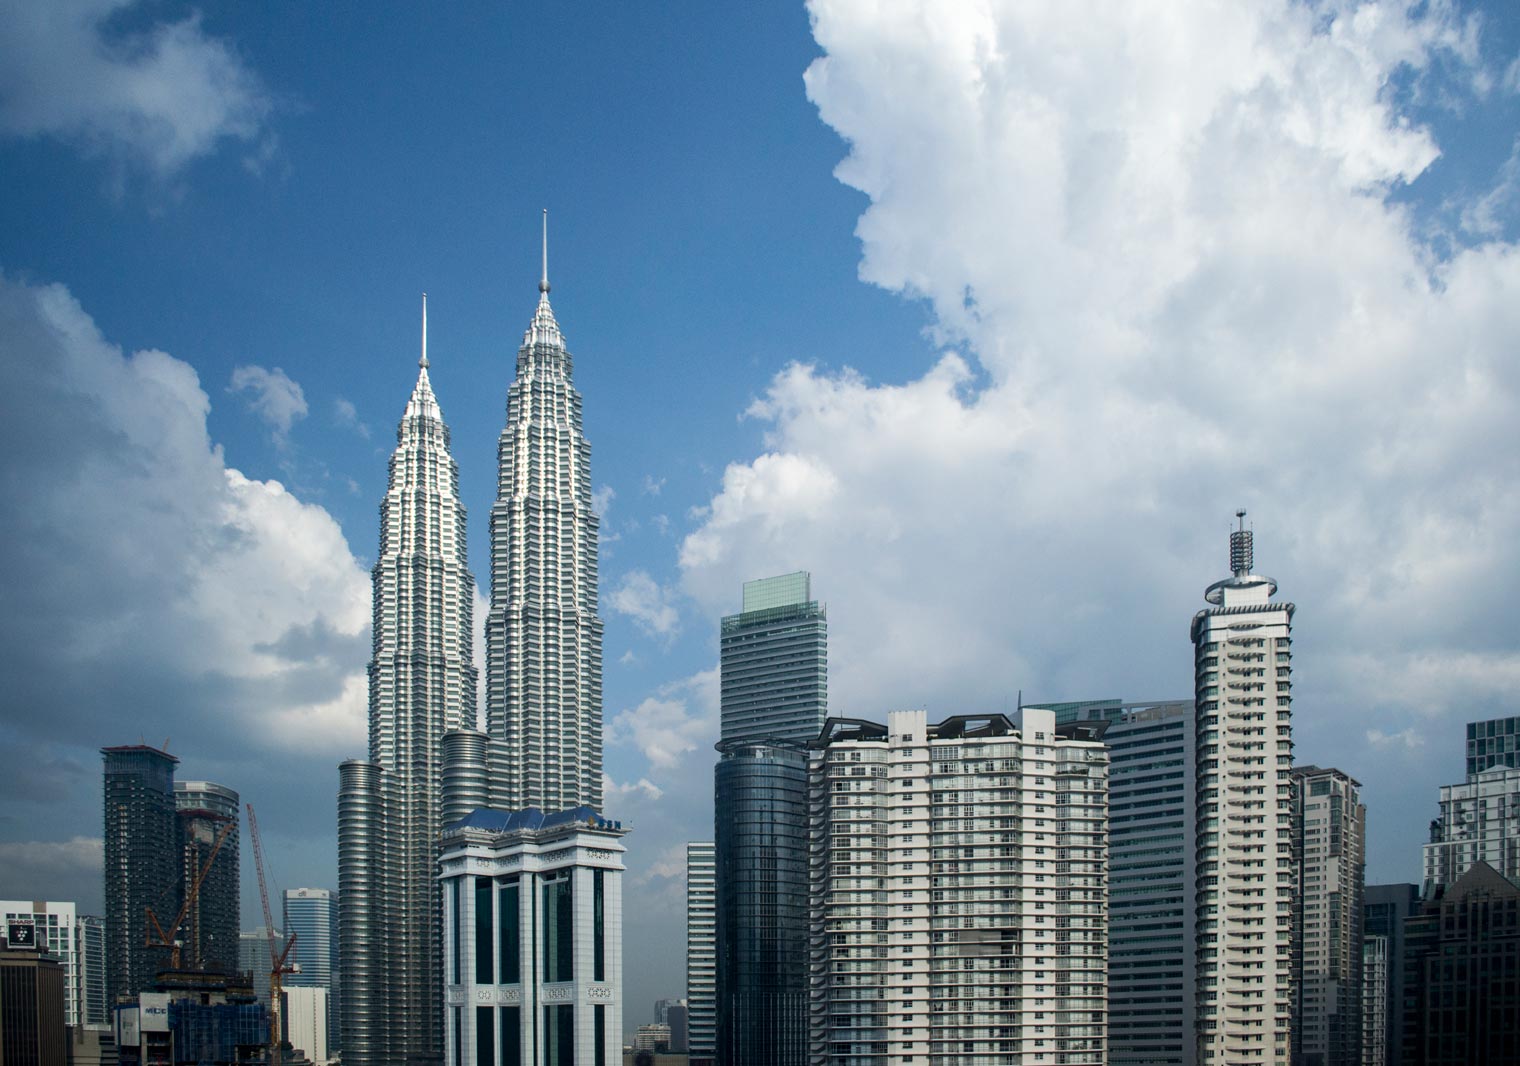 Central Business District of Kuala Lumpur with the Petronas Twin Towers, Malaysia